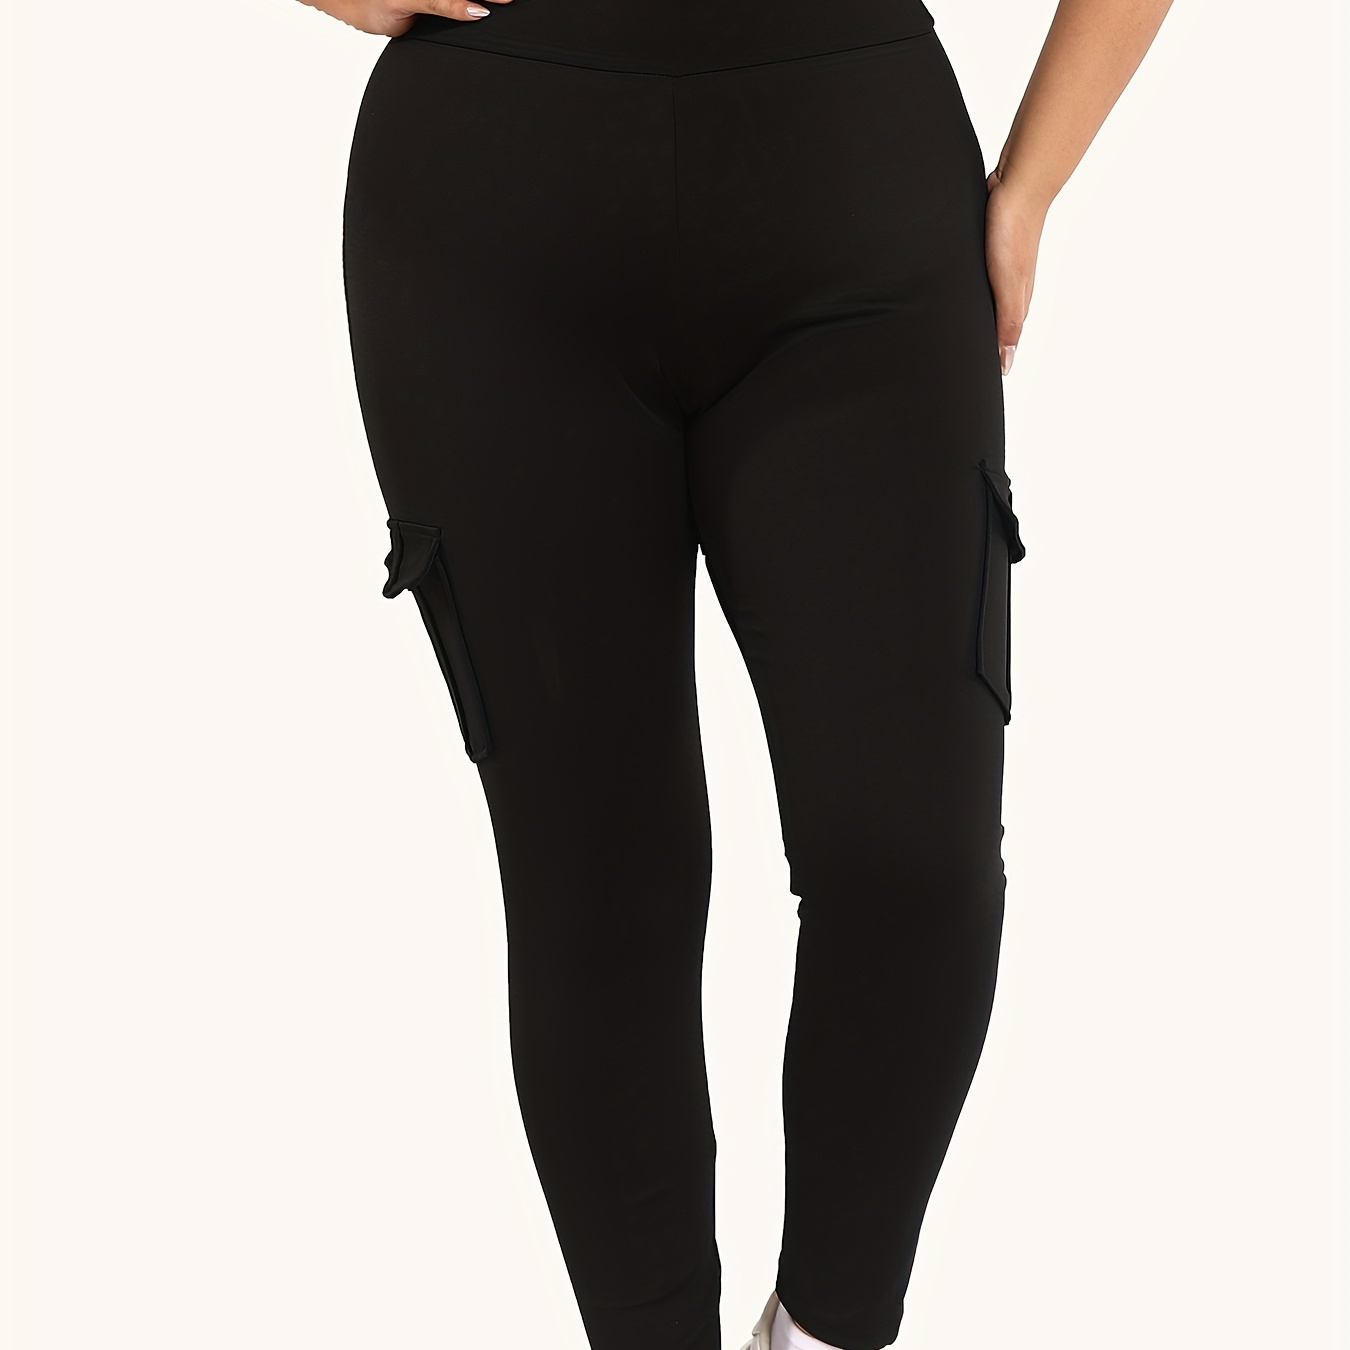 

Plus Size Sports Leggings, Women's Plus Solid High Rise Skinny Fitness Leggings With Flap Pockets Cargo Pants